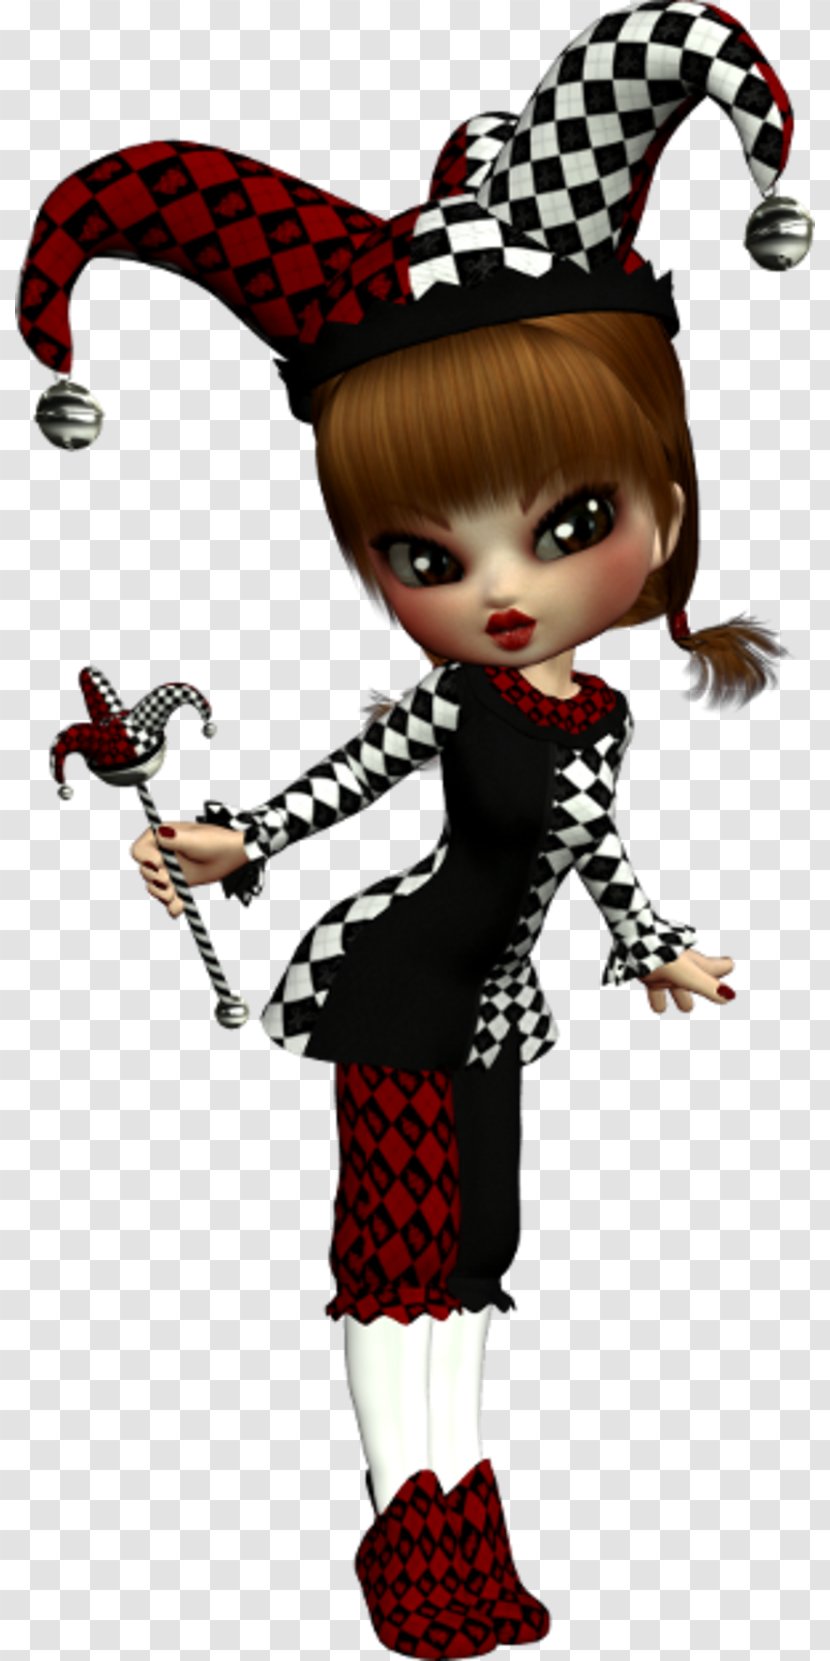 The Harlequin's Carnival Doll Puss In Boots Character - Ever After High Transparent PNG